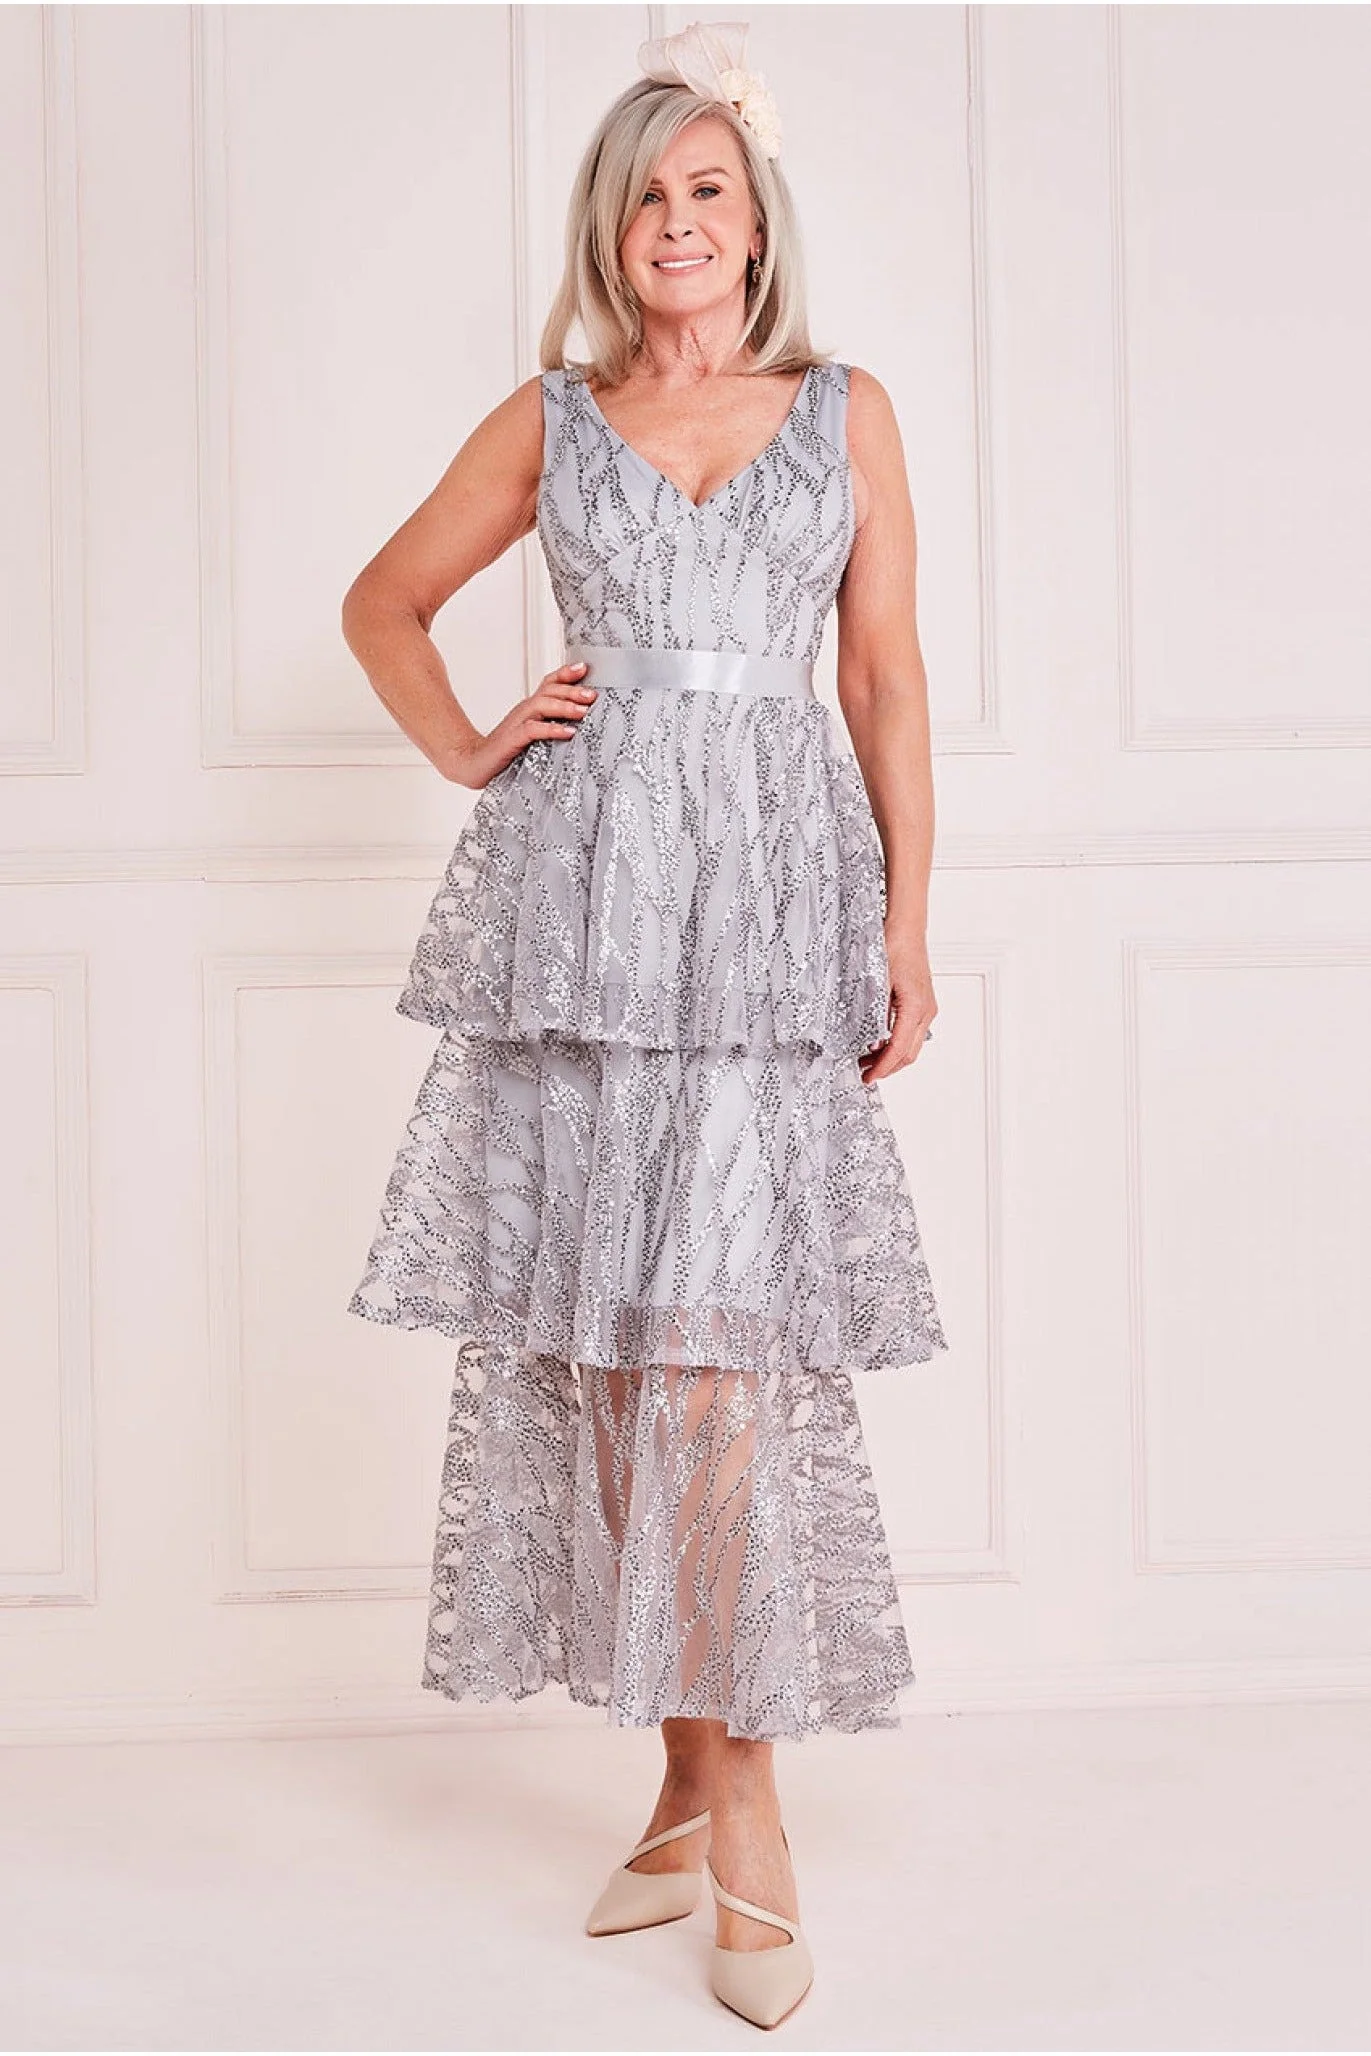 wedding guest outfit for over 60s